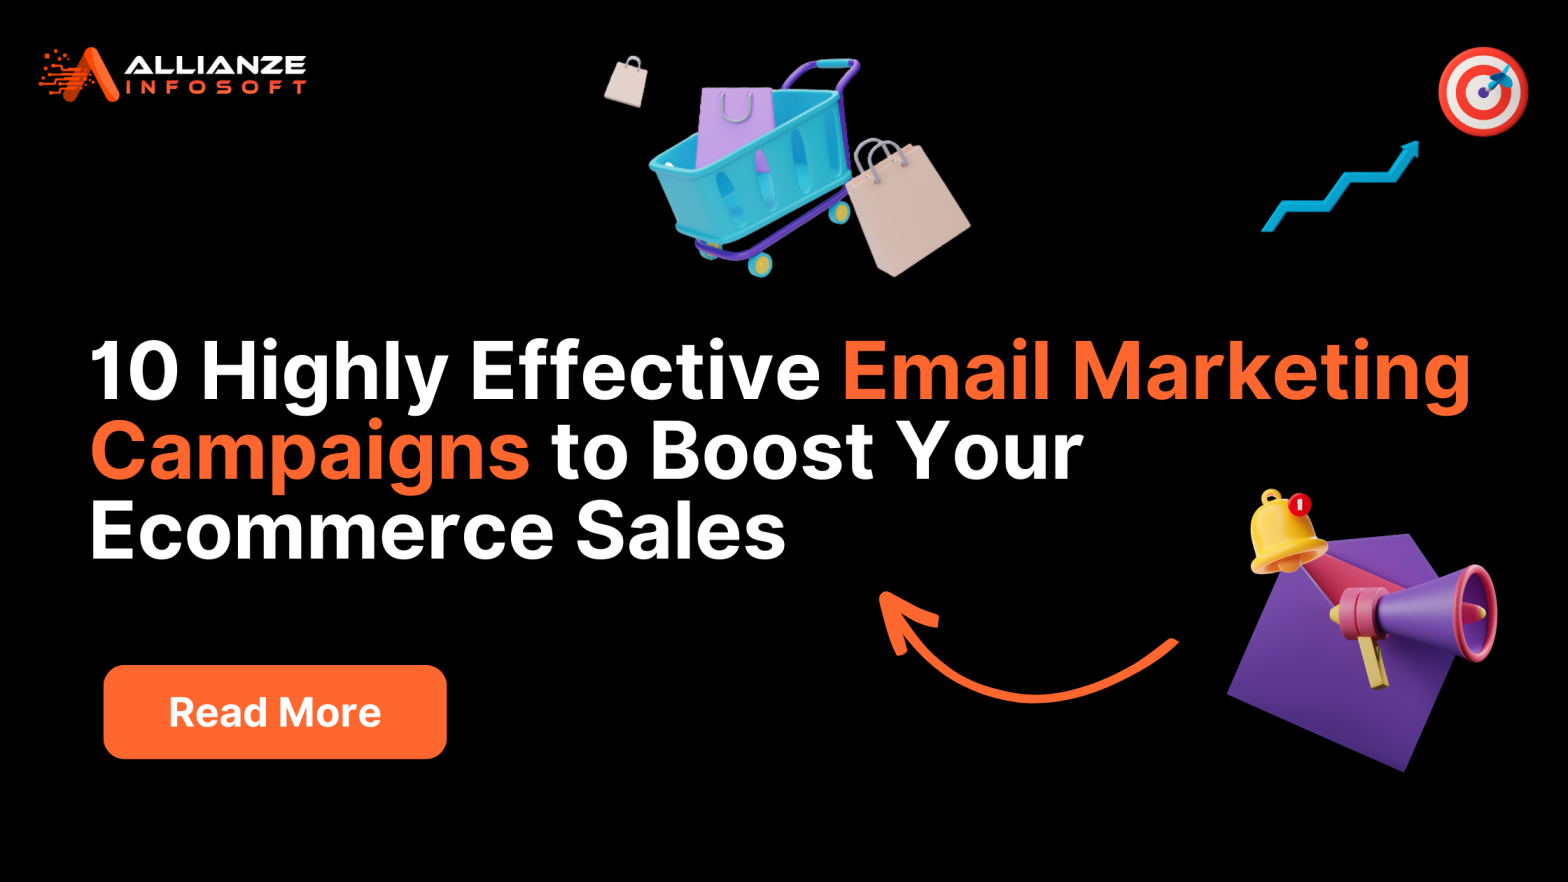 10 Highly Effective Email Marketing Campaigns to Boost Your Ecommerce Sales